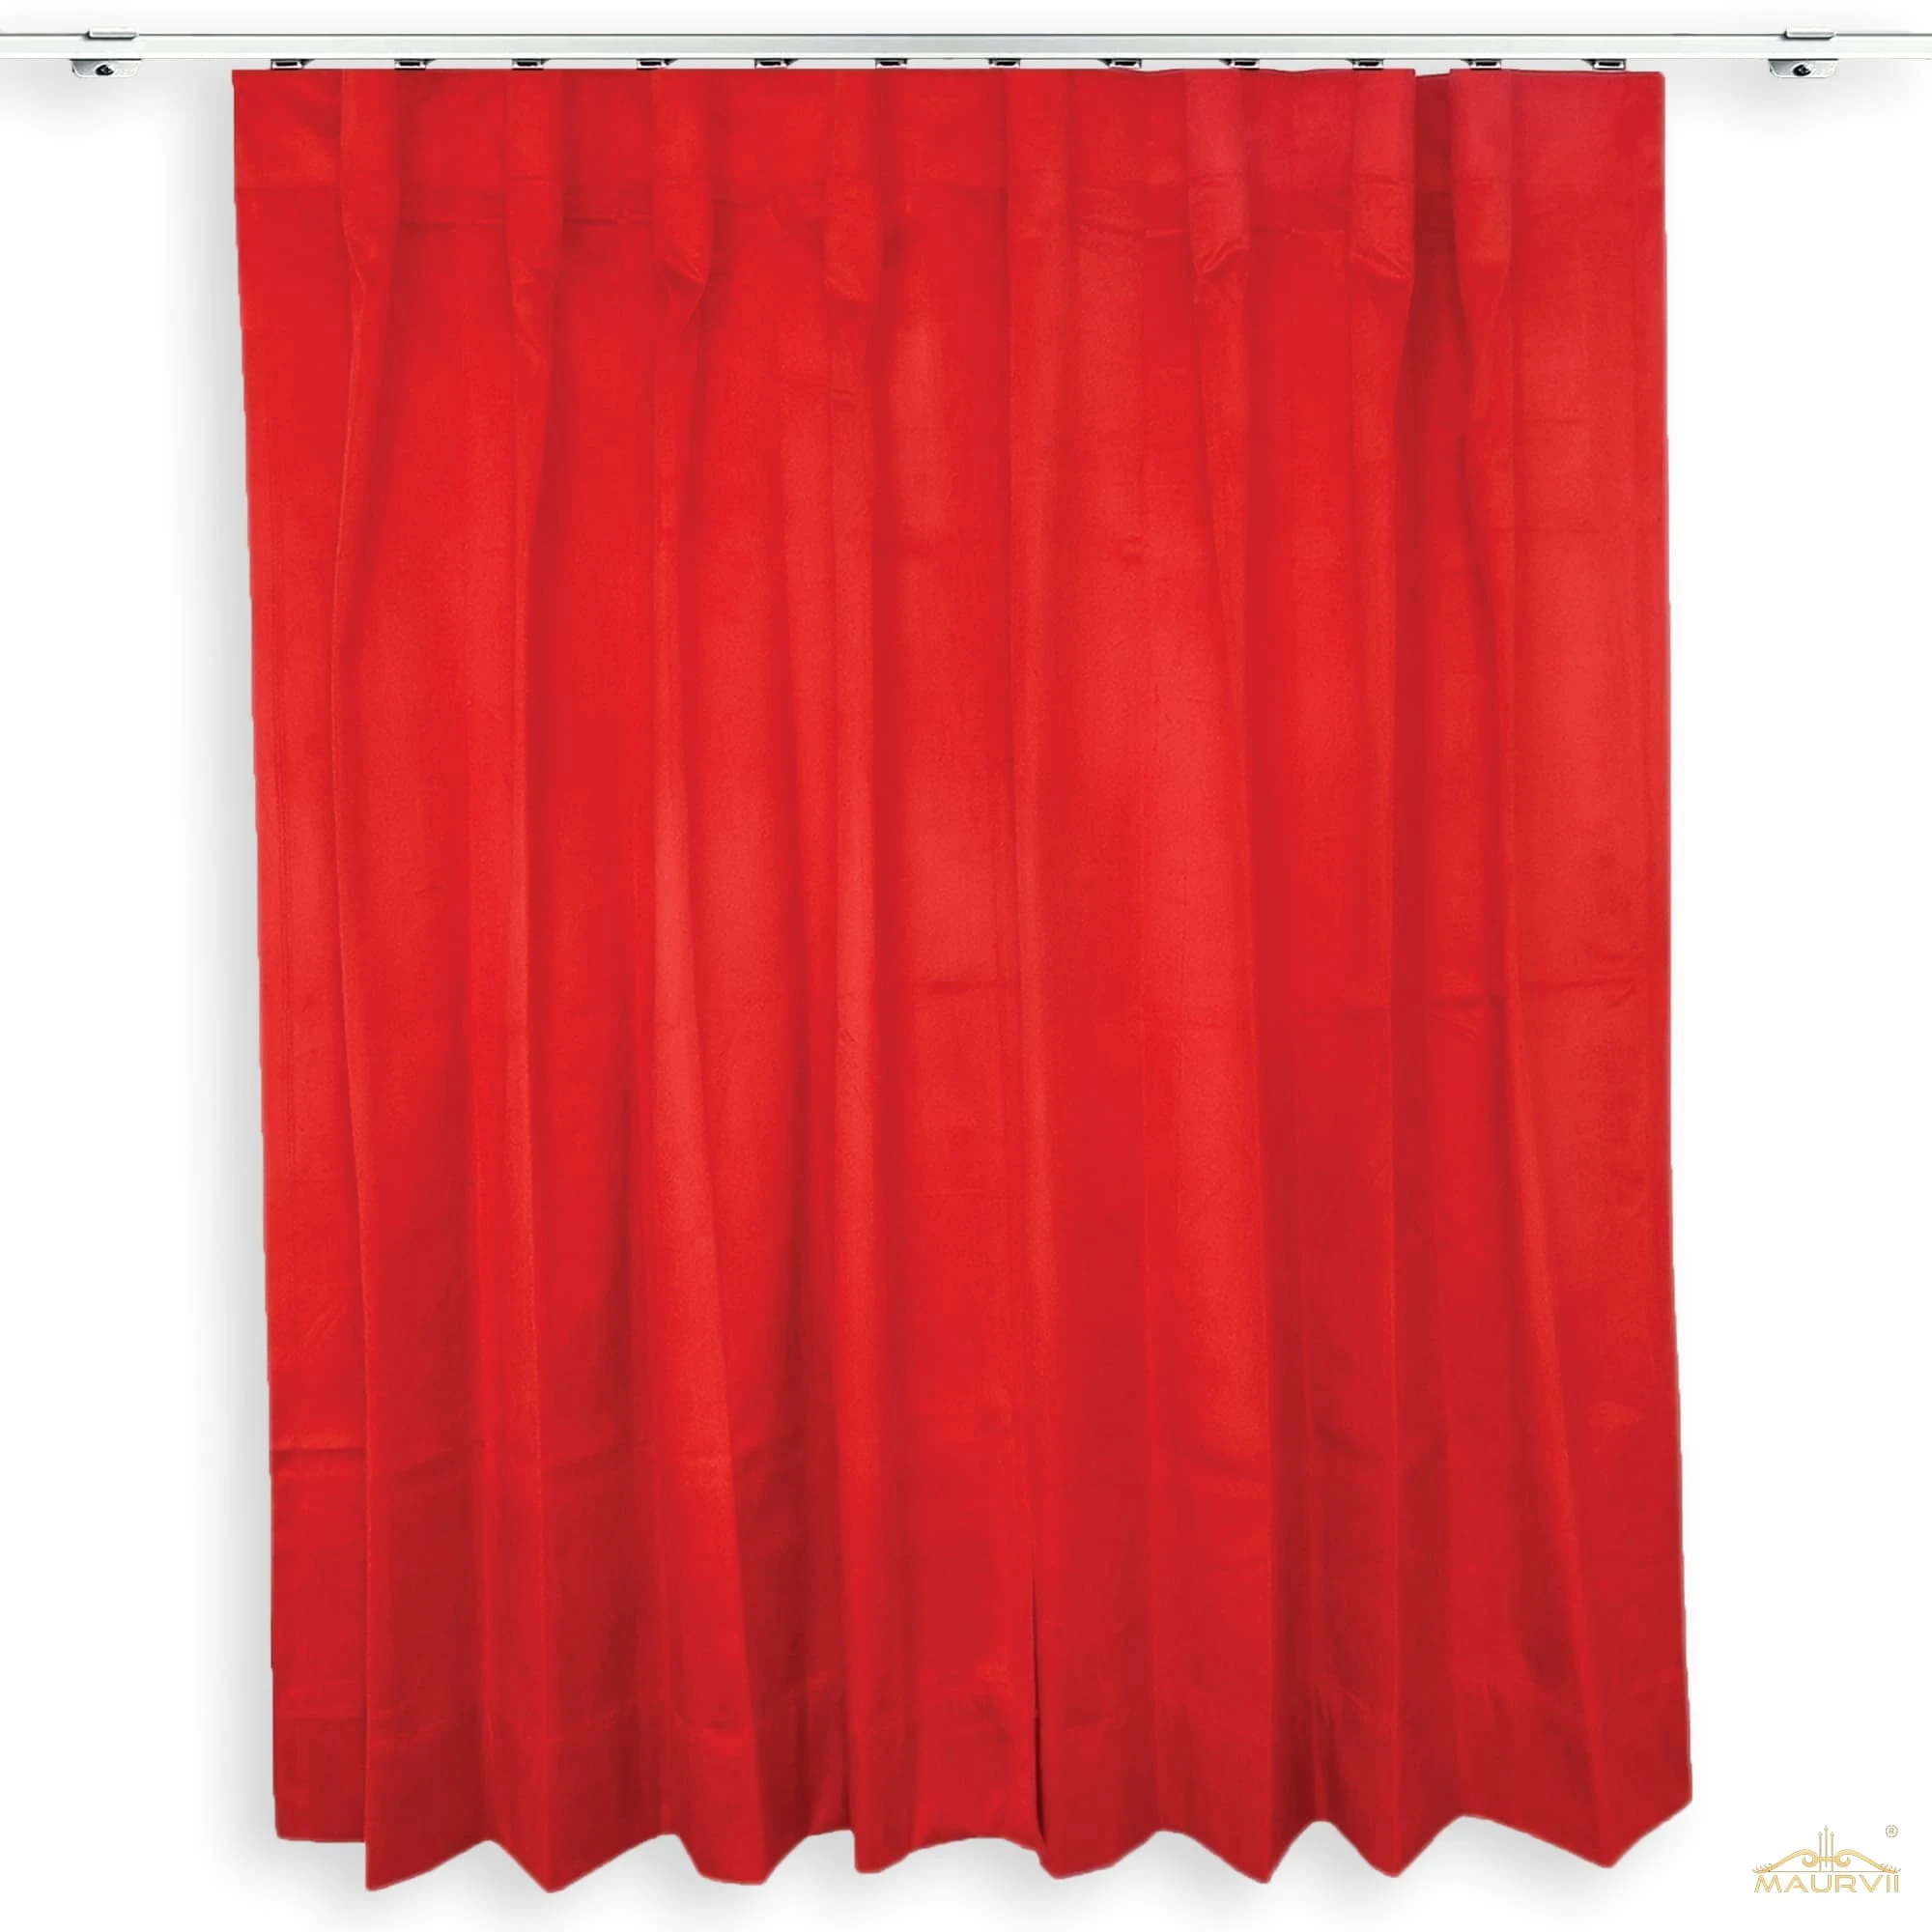 Triple pleated velvet curtains in red color